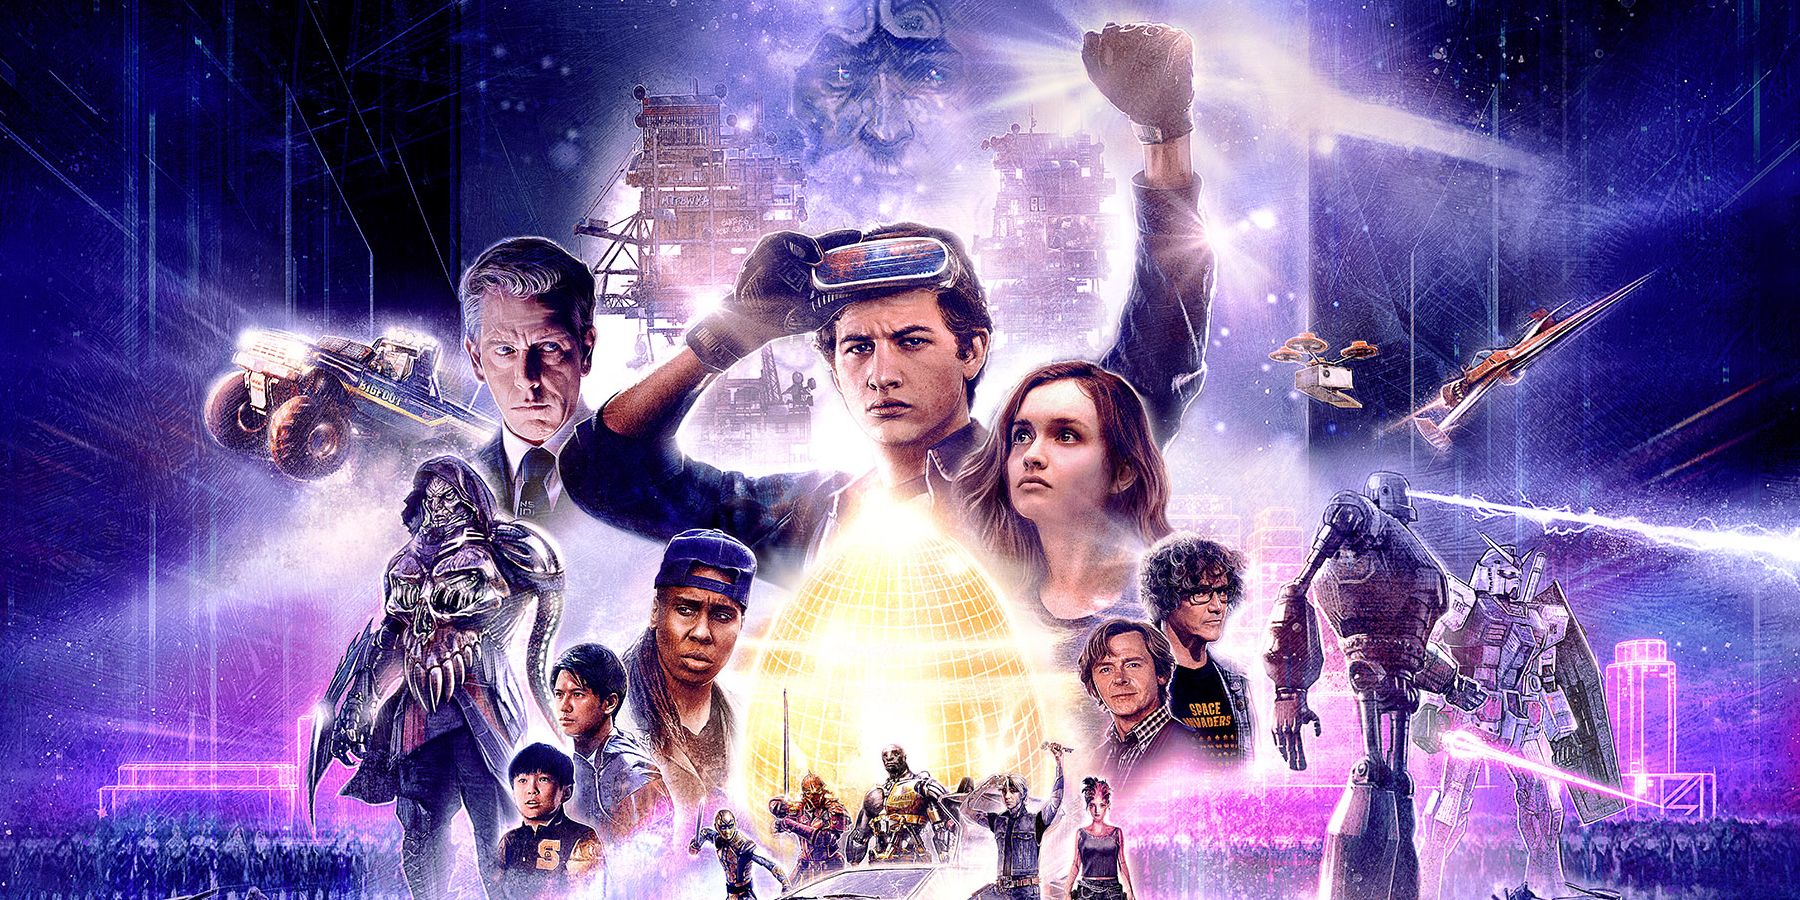 The promo shot of Ready Player One